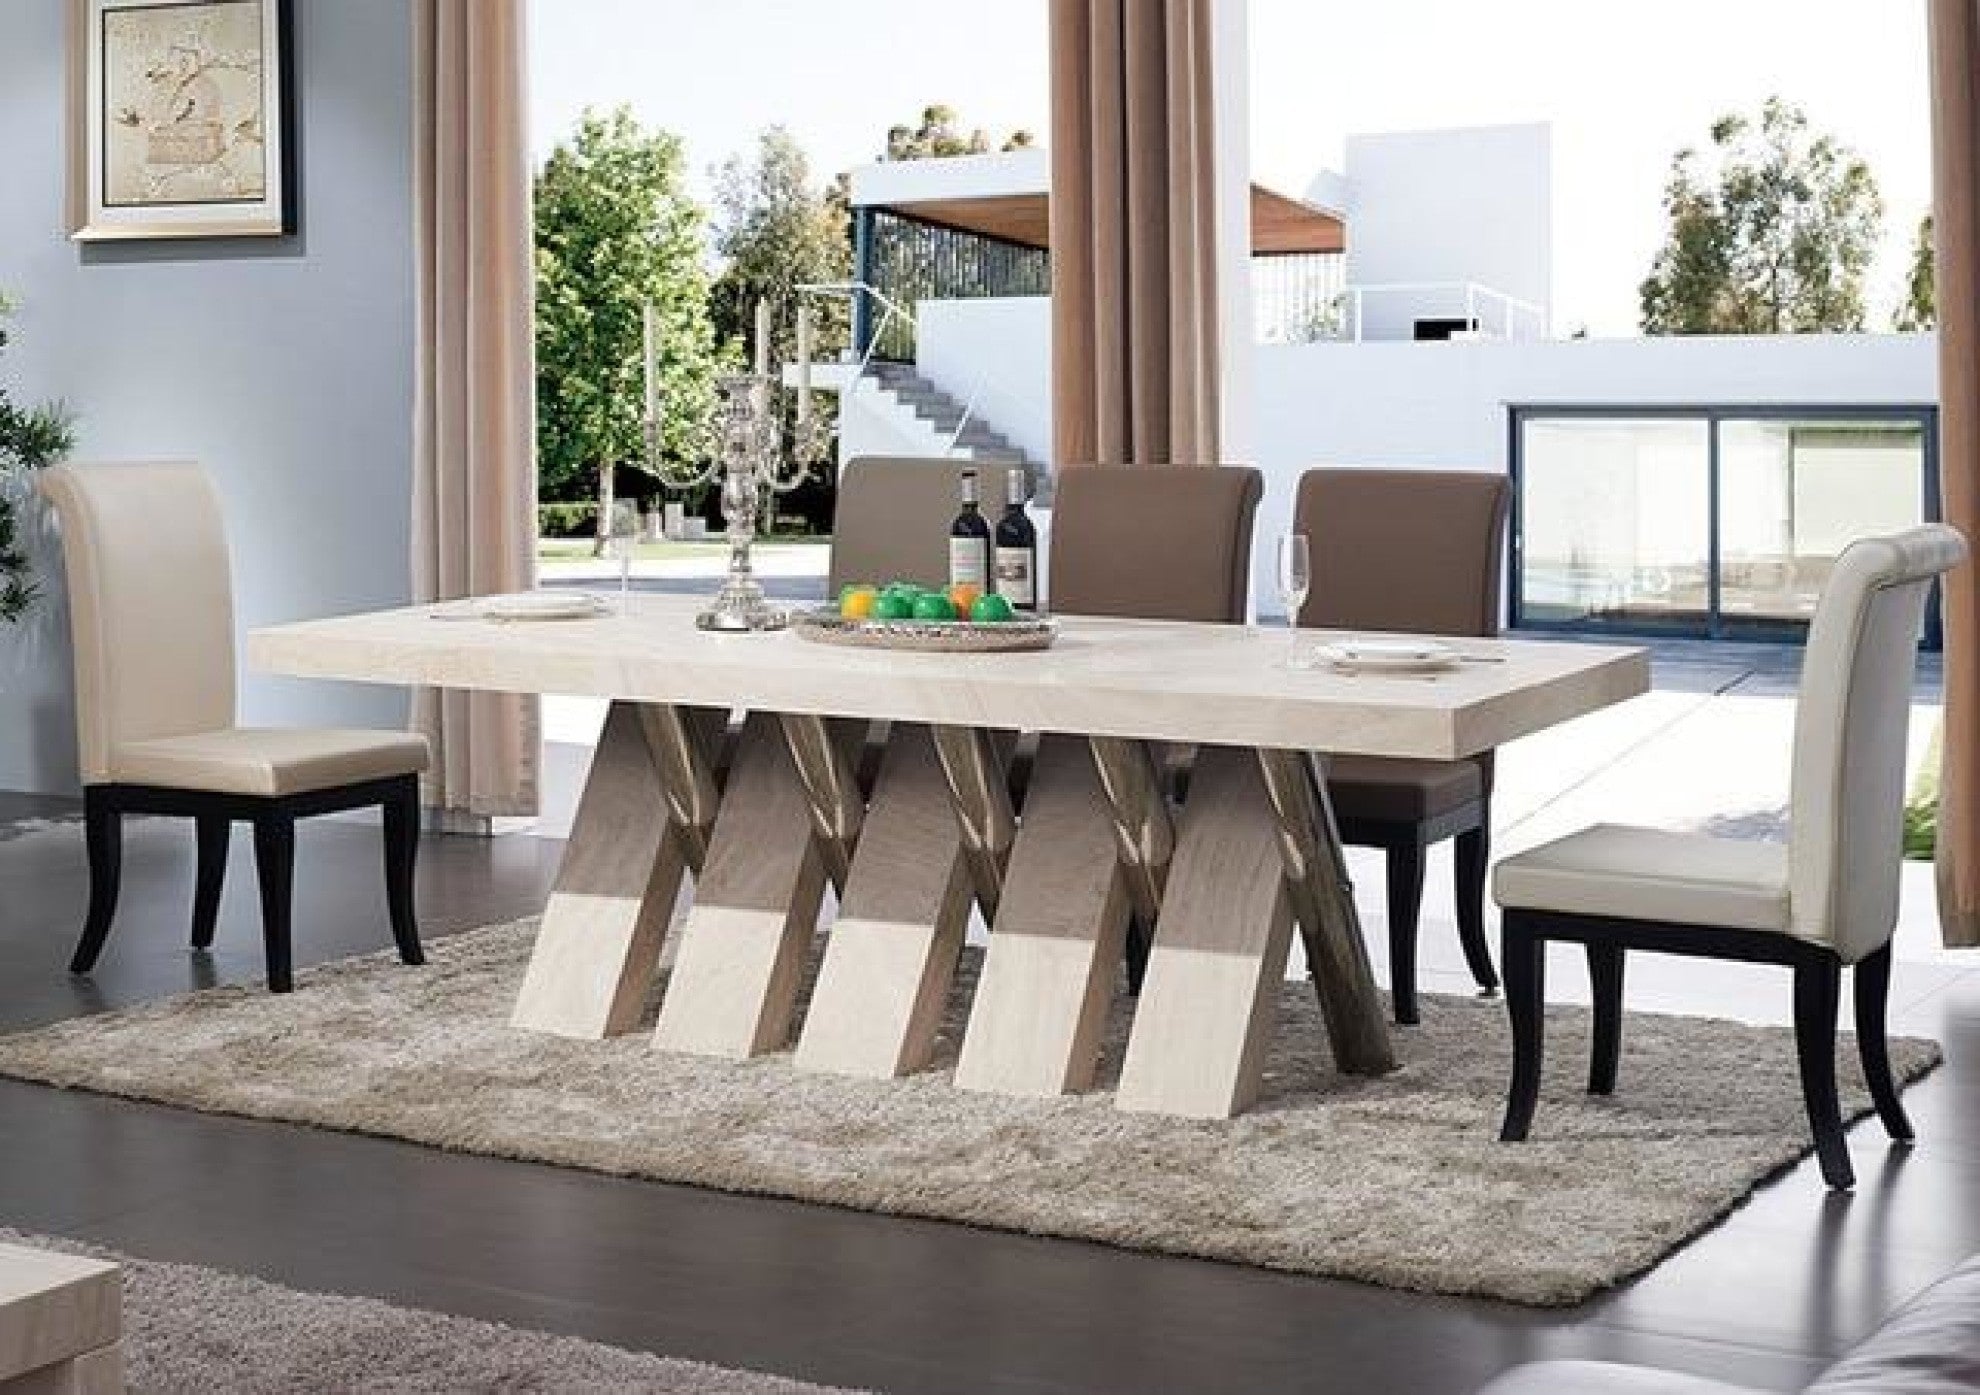 All Modern Dining Table Set Clearance Outlet, Save 66% | jlcatj.gob.mx